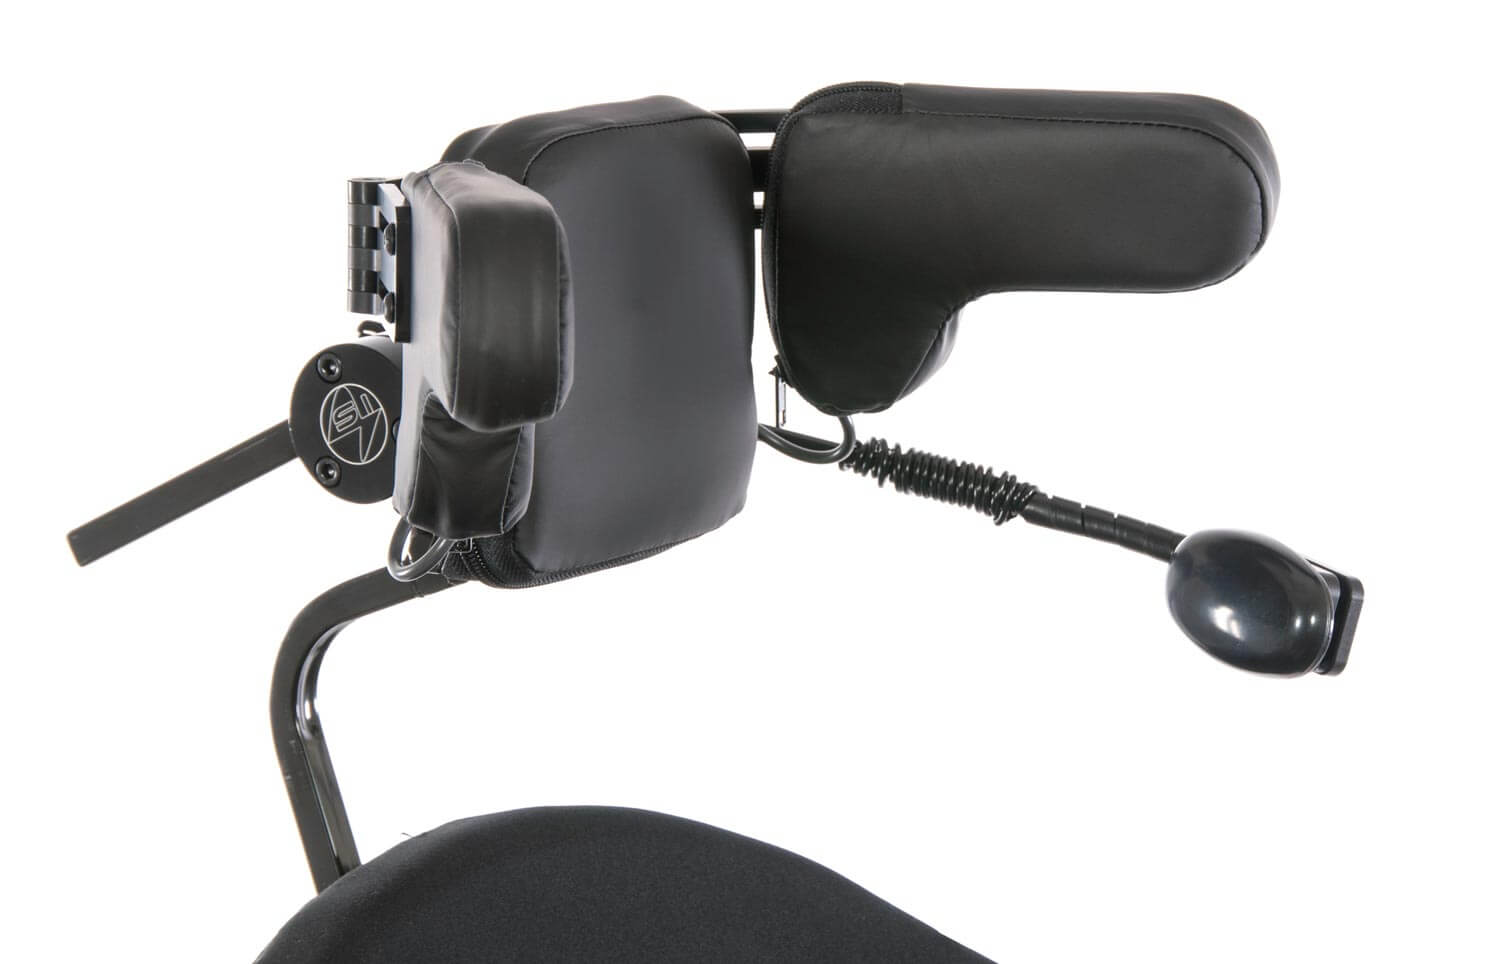 <p>- usually has a three piece headrest (two side pads and one center) with proximity switches built into each pad - by being in proximity to the switch embedded in the pad, the client moves the wheelchair in the desired direction.</p>